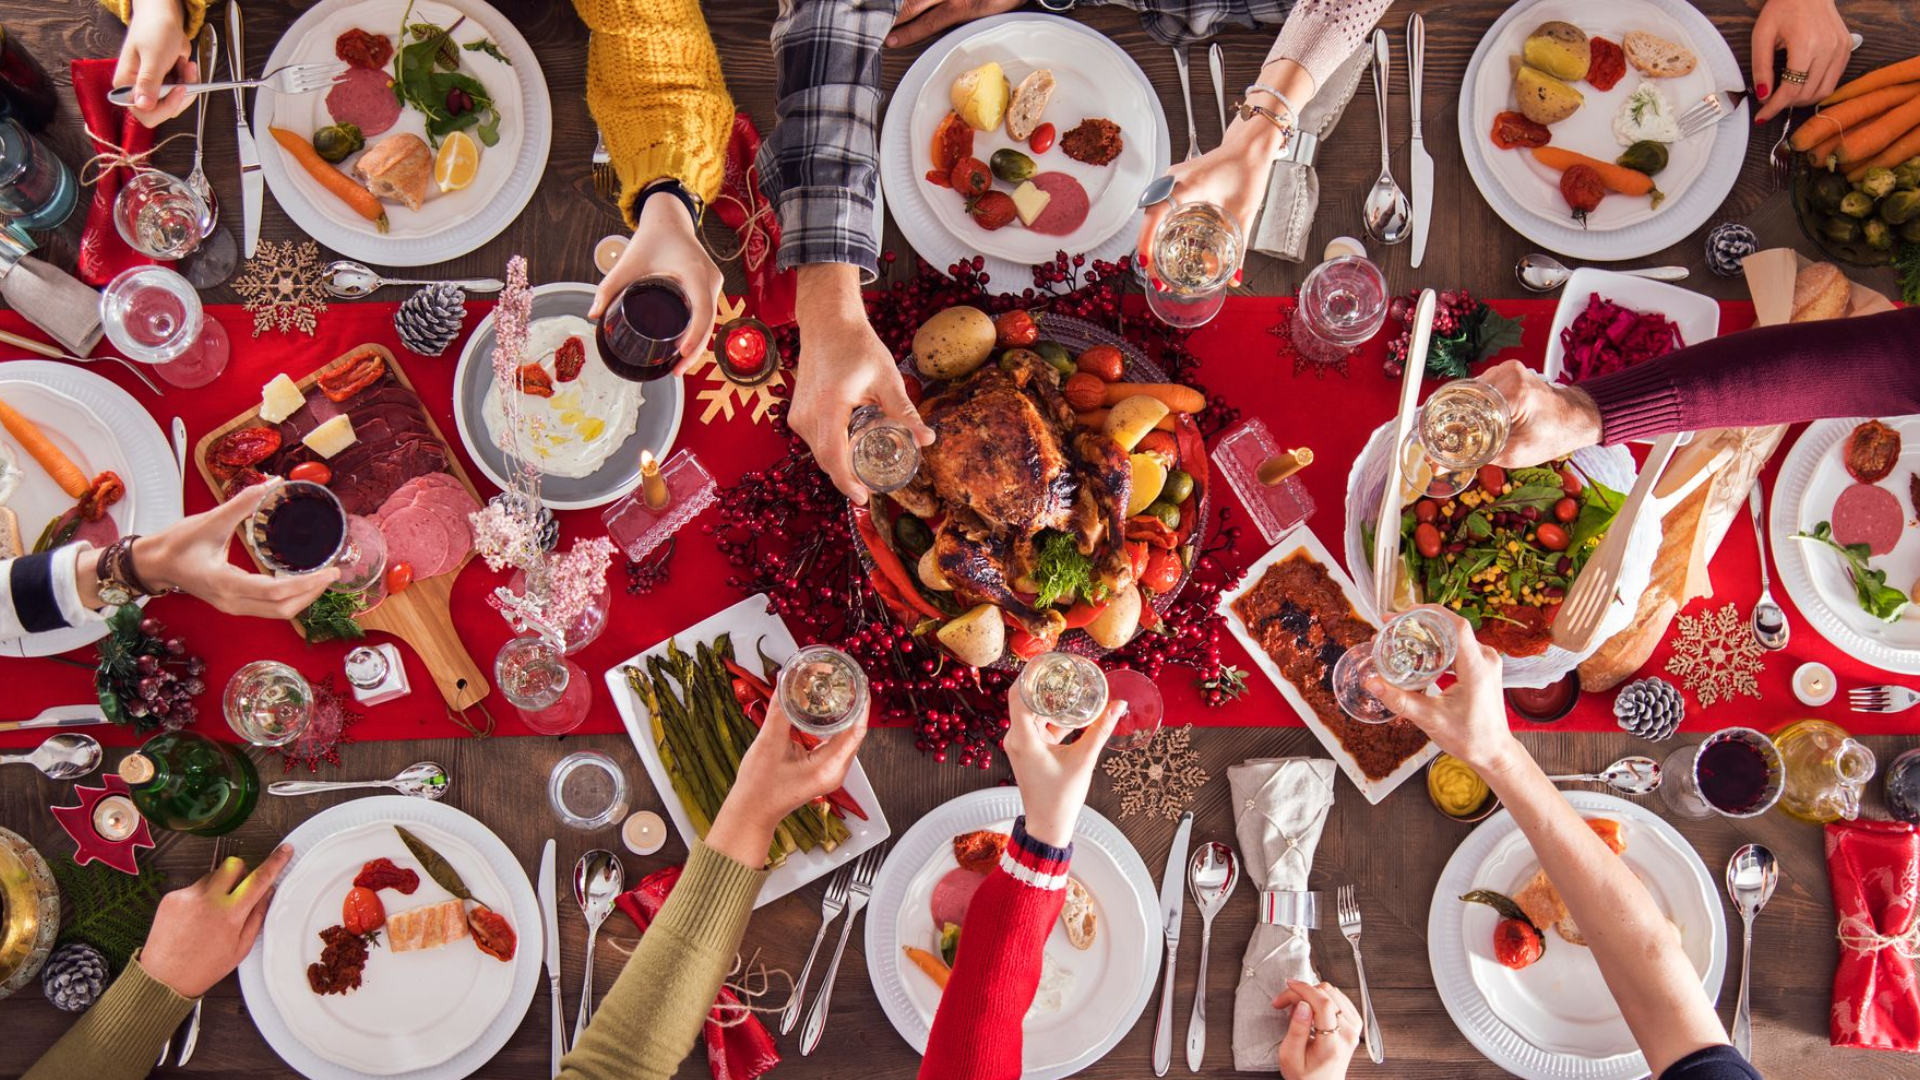 What to do (and what not to do) at your next holiday gathering